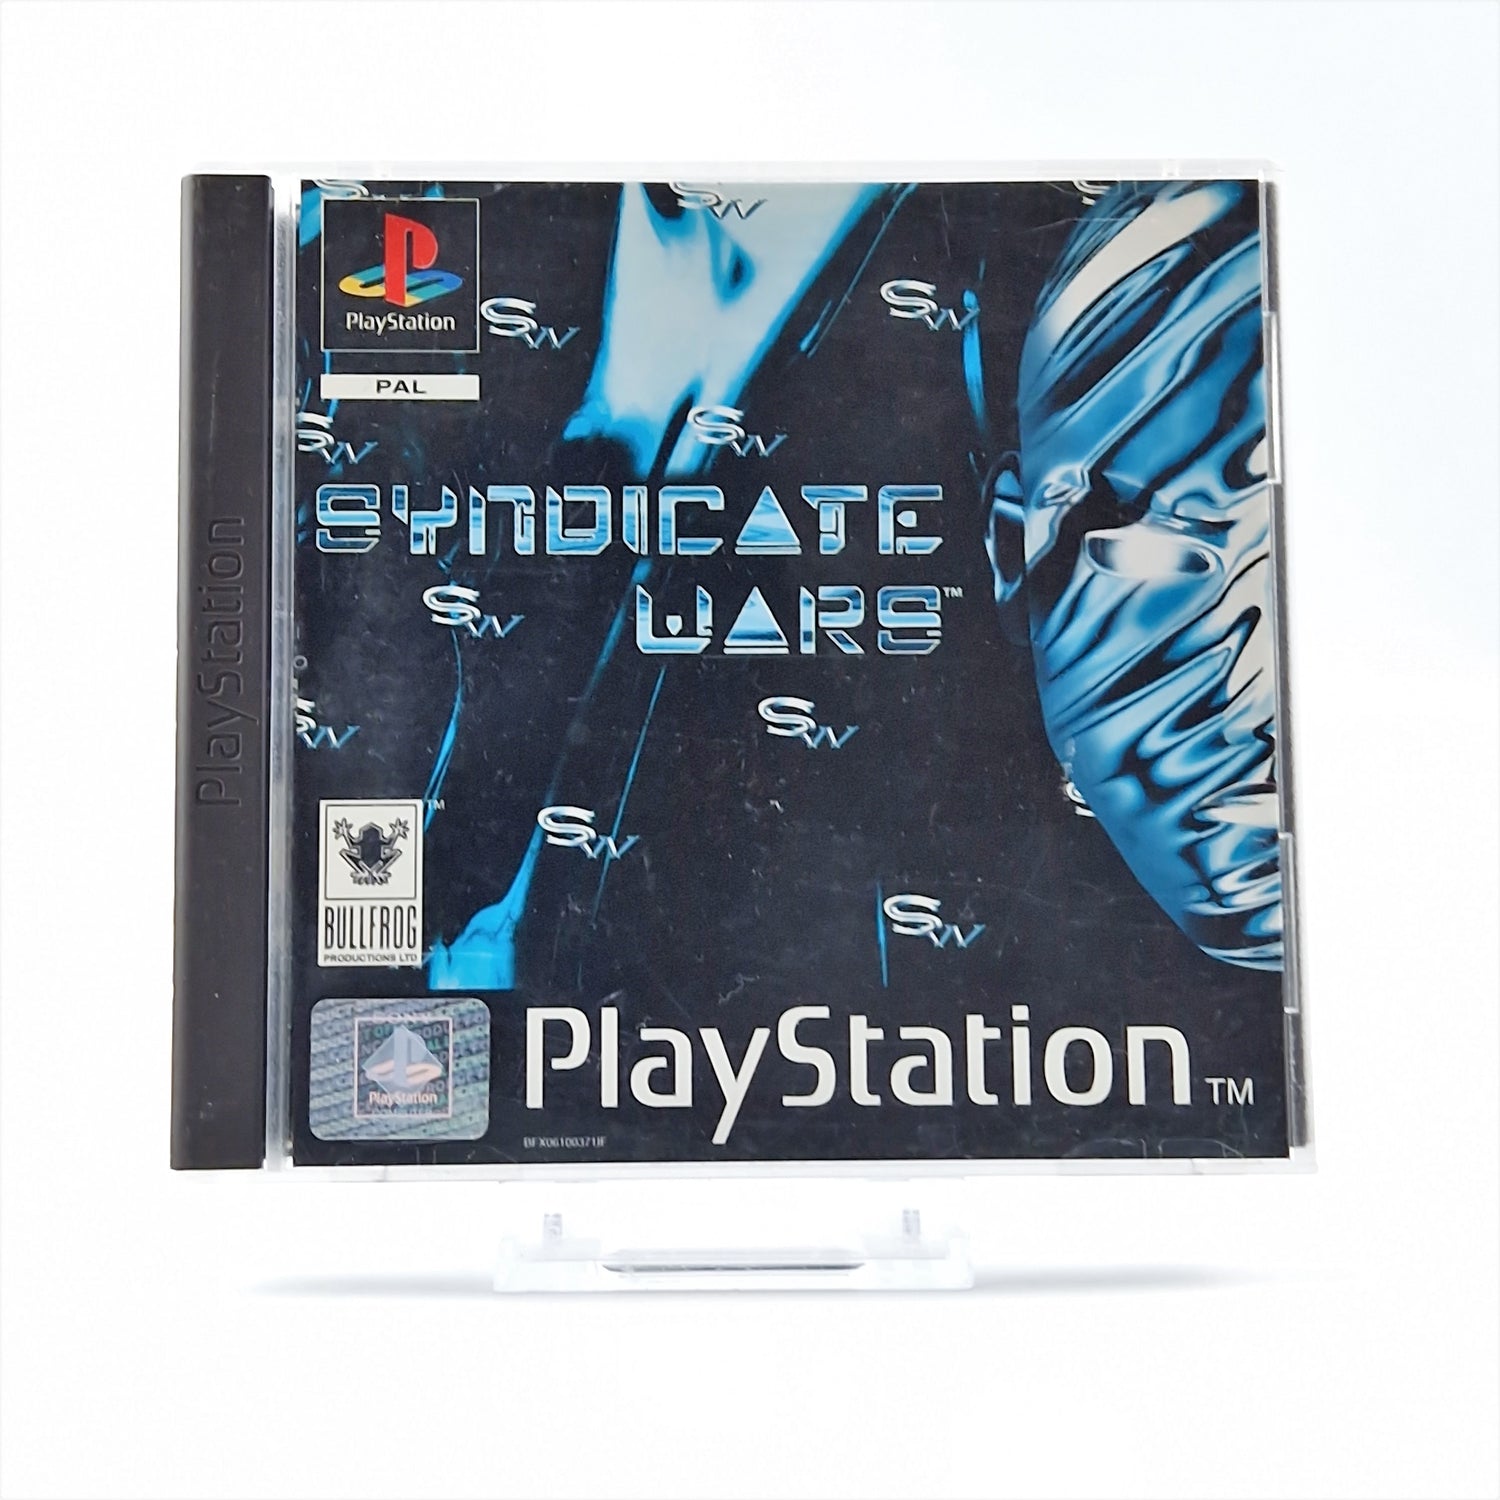 Playstation 1 Game: Syndicate Wars - Sony PS1 PSX / OVP Instructions CD PAL